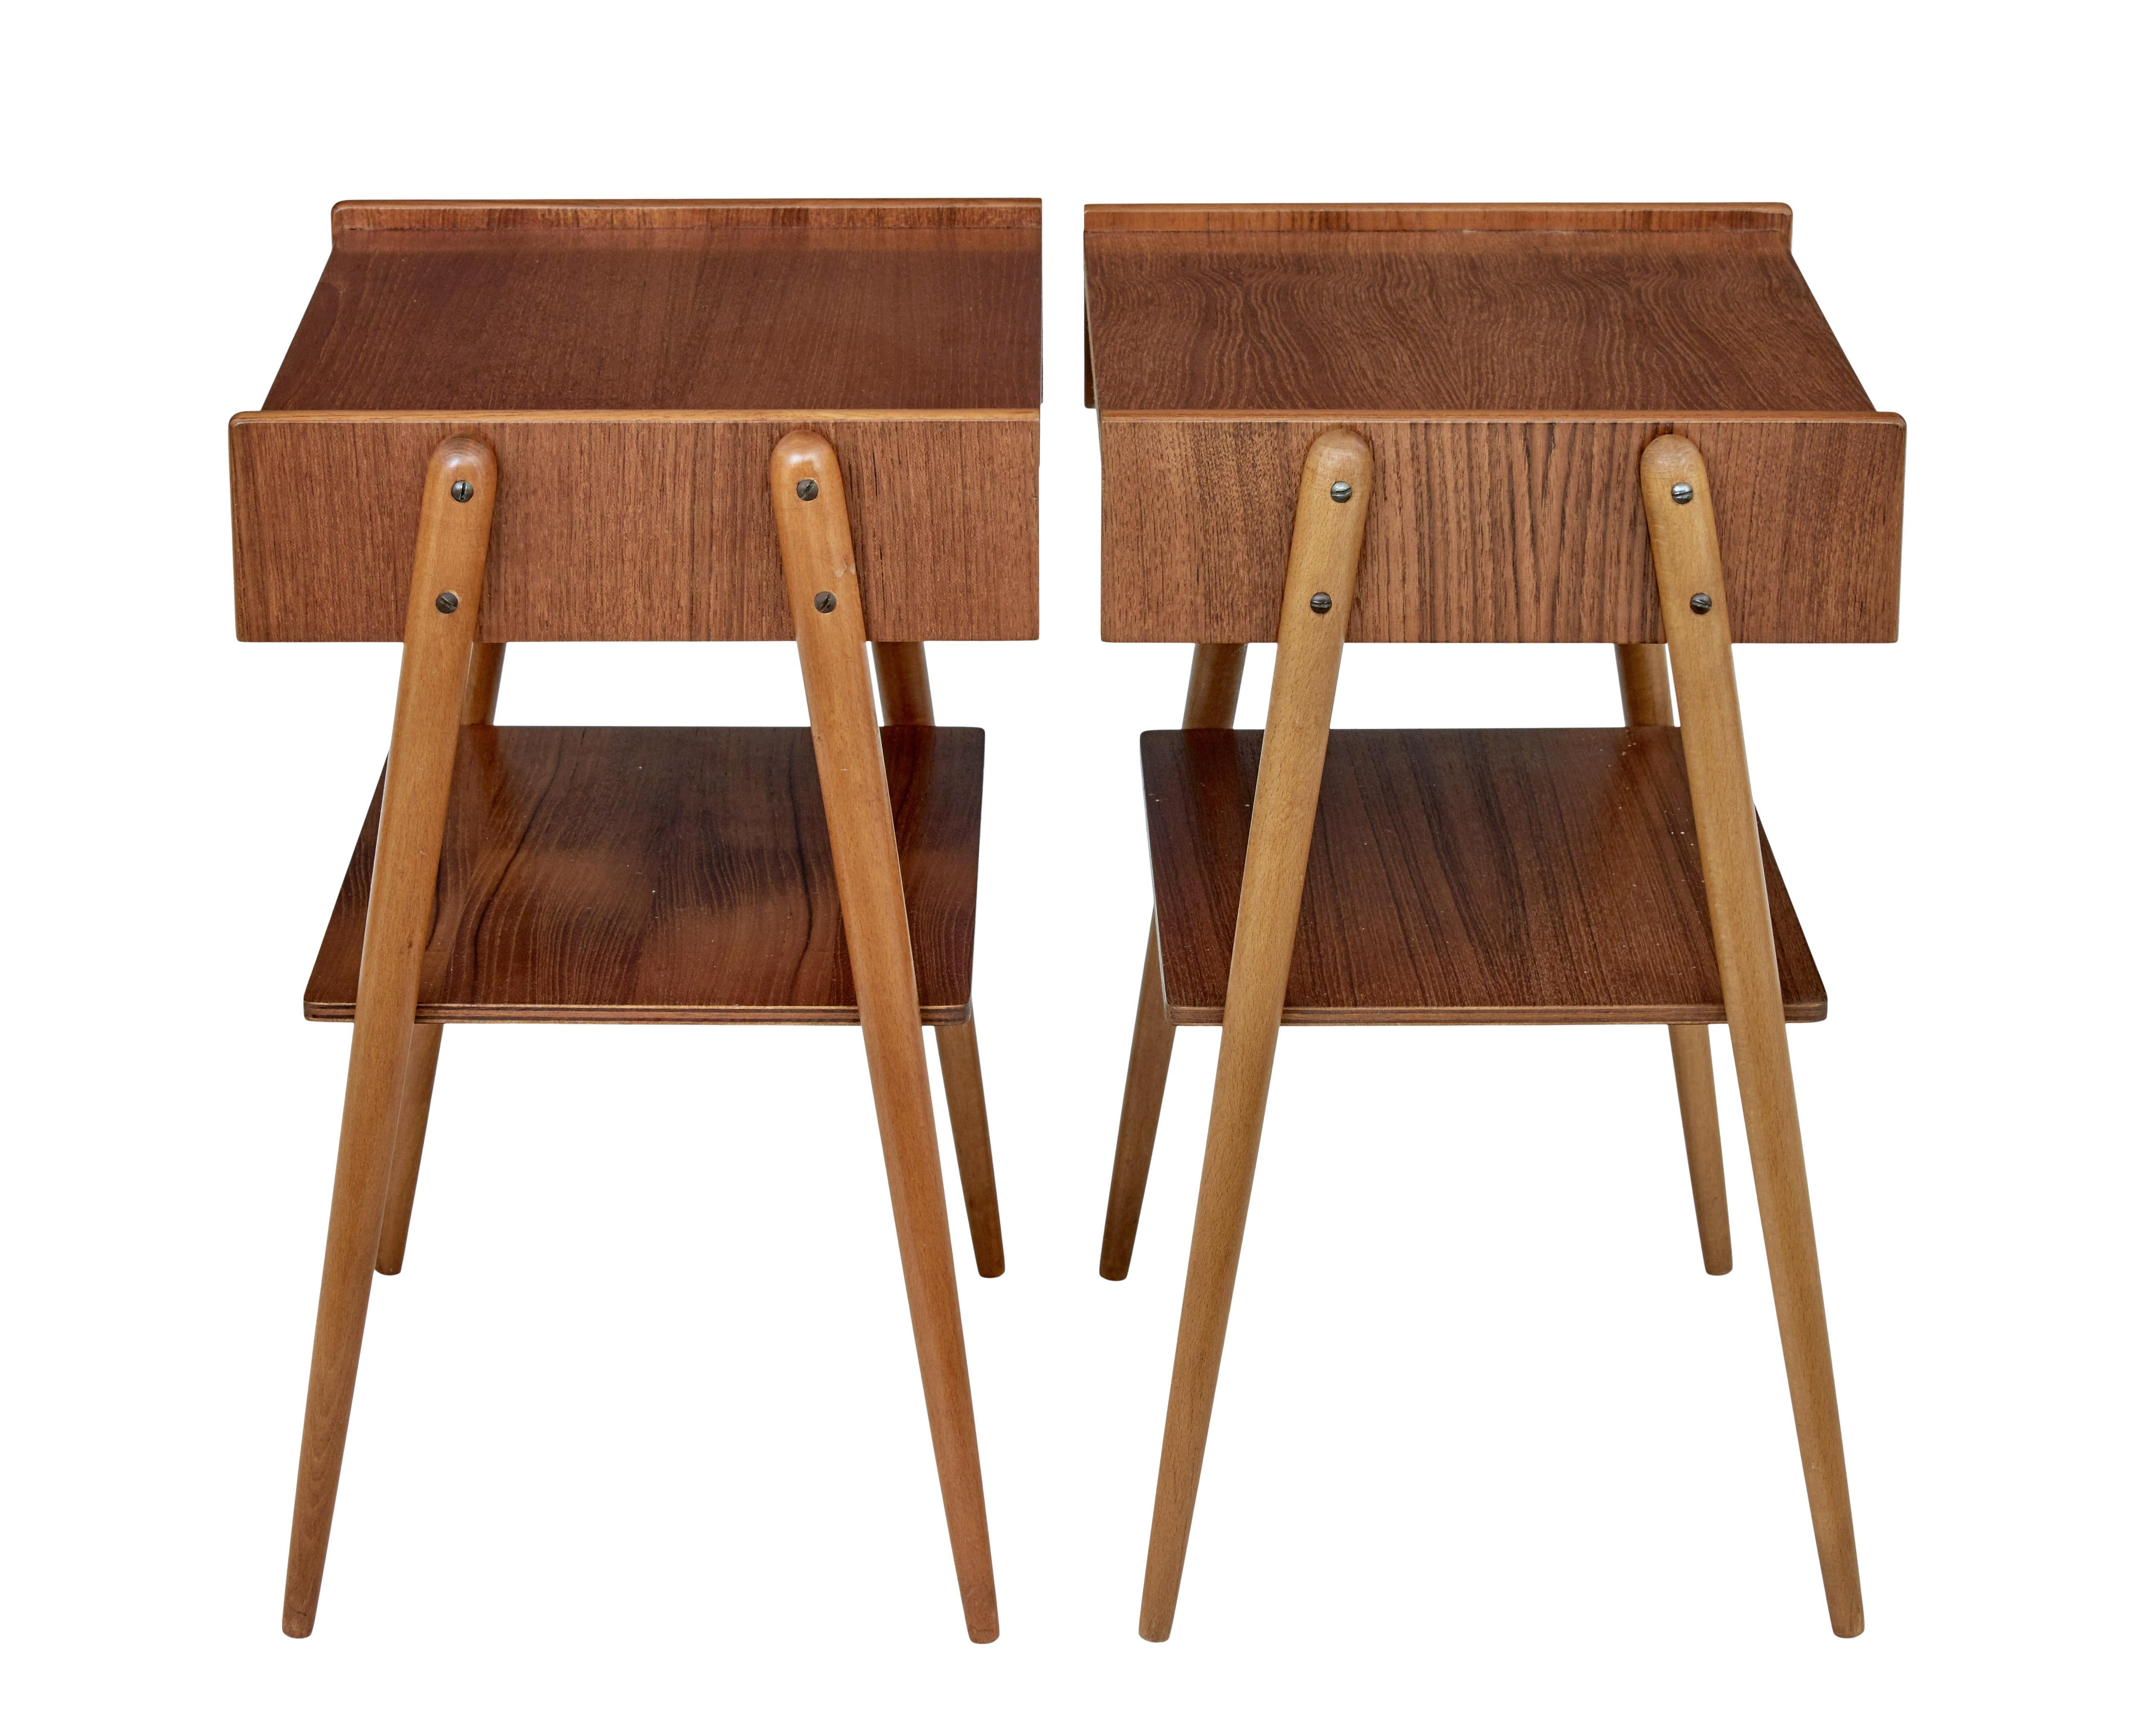 Pair of mid-20th century teak bedside tables by AB Carlstrom & Co Mobelfabrik, circa 1960.

Original and well know design of bedside tables by Swedish Company Carlstrom & Co. Veneered in teak, with single drawer below the top surface and a further